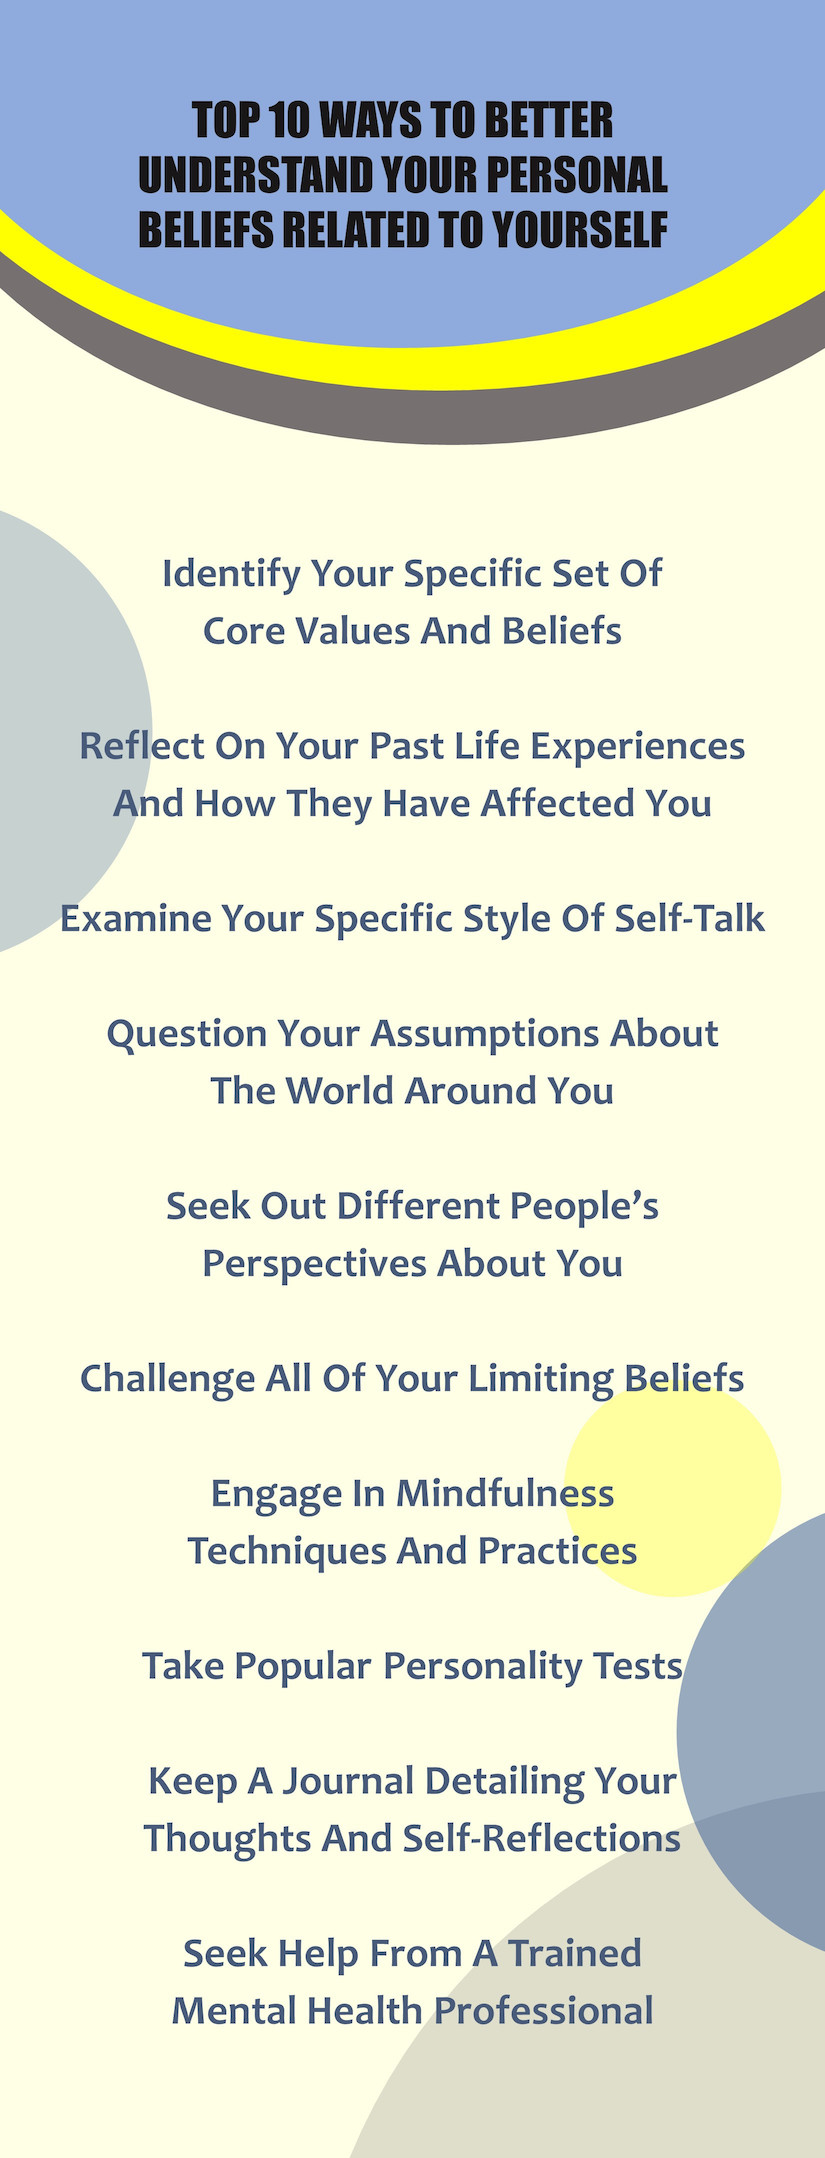 10 Ways to better understand your personal beliefs related to yourself